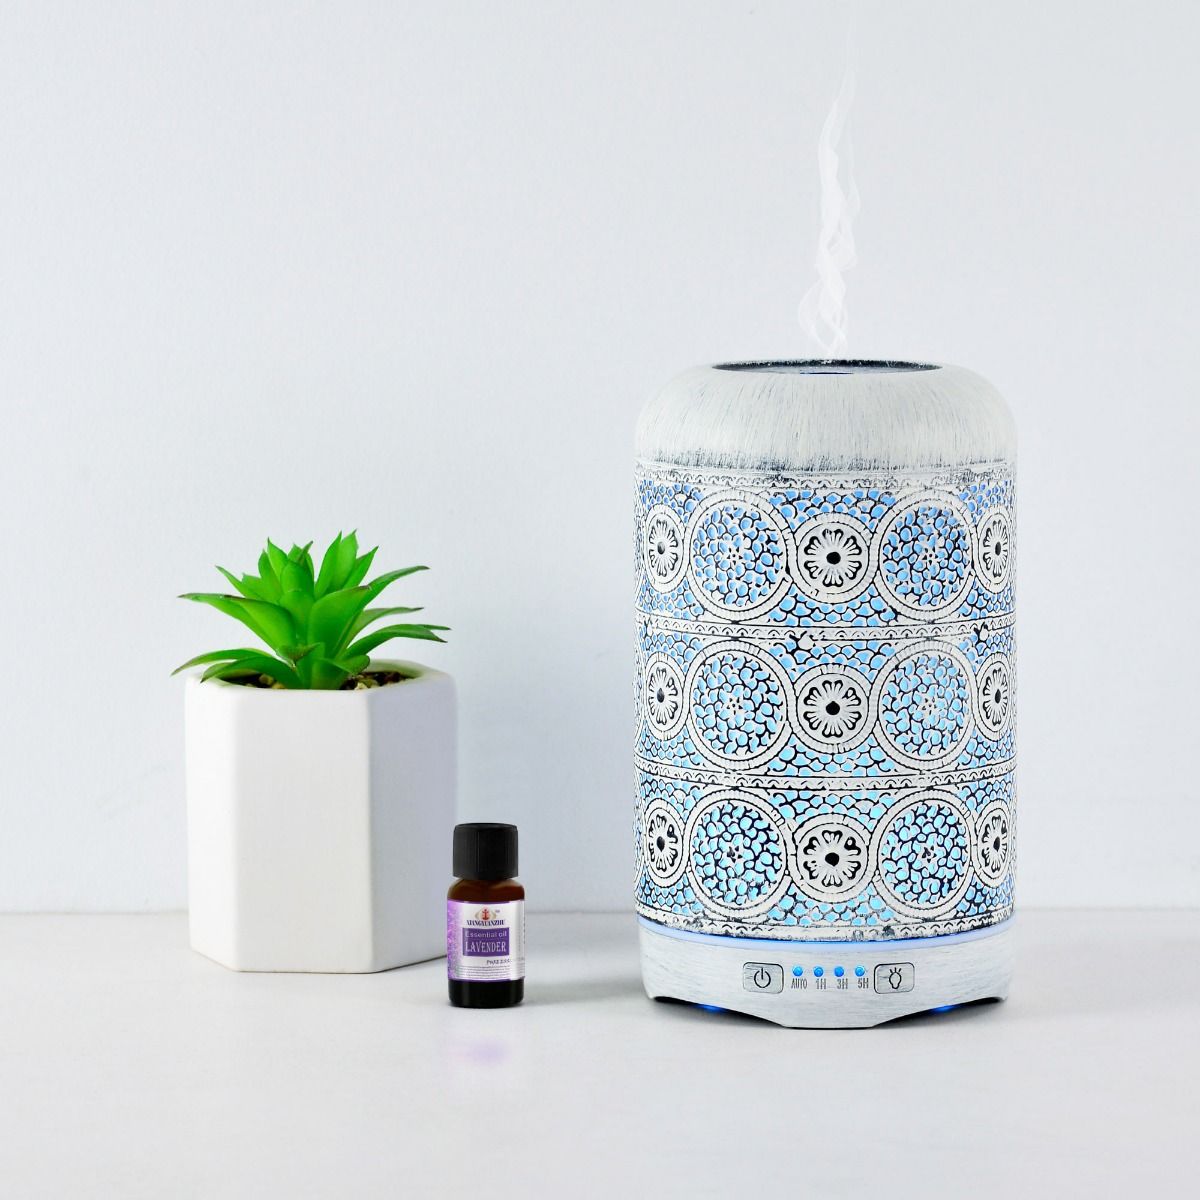 activiva 260ml Metal Essential Oil and Aroma Diffuser-Vintage White - SILBERSHELL